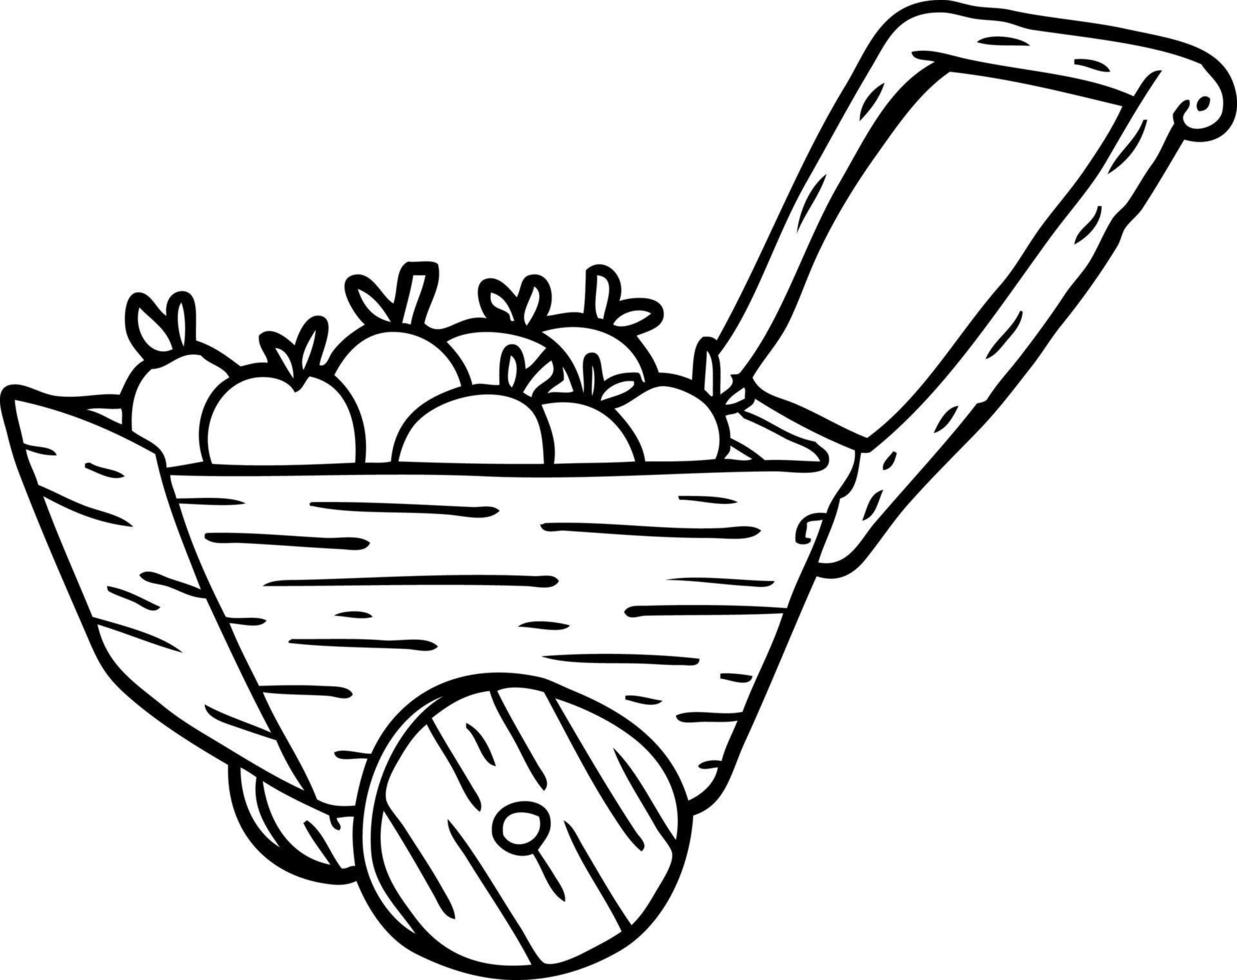 line drawing of a cart full of fresh apples vector